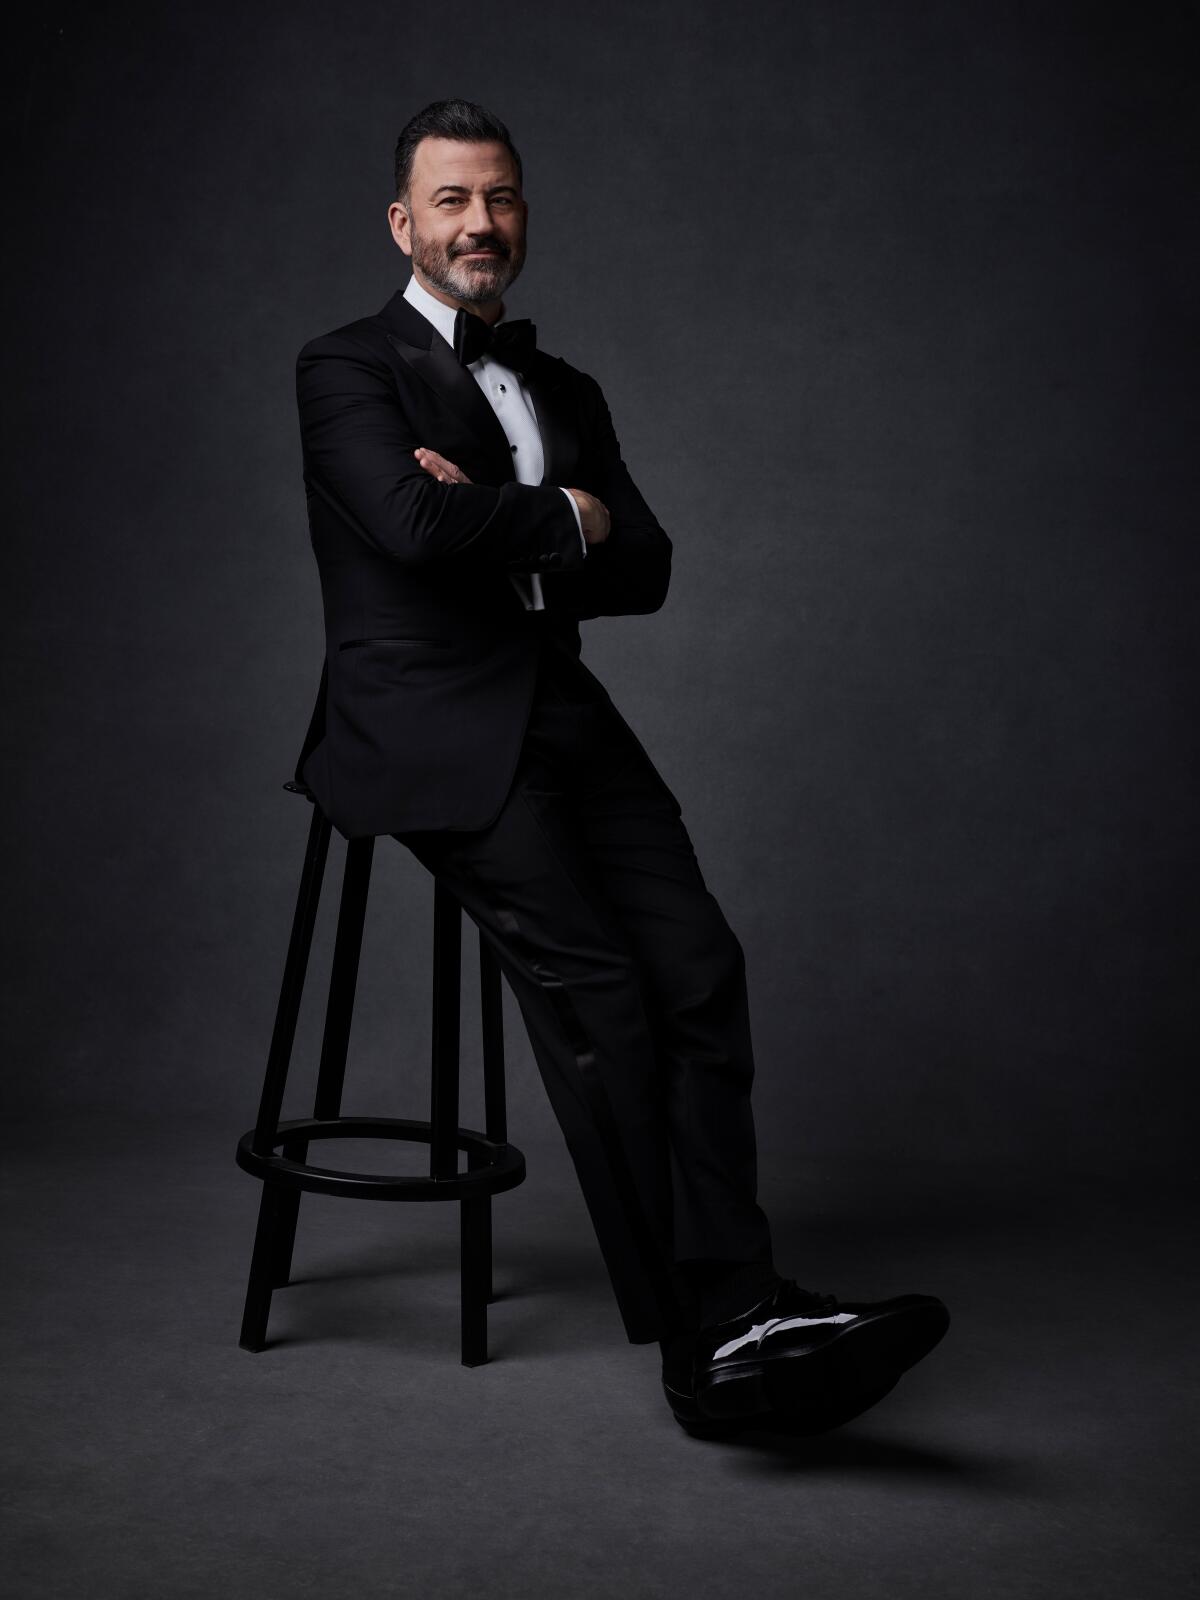 Jimmy Kimmel poses for a photo wearing a tux and sitting on a stool.